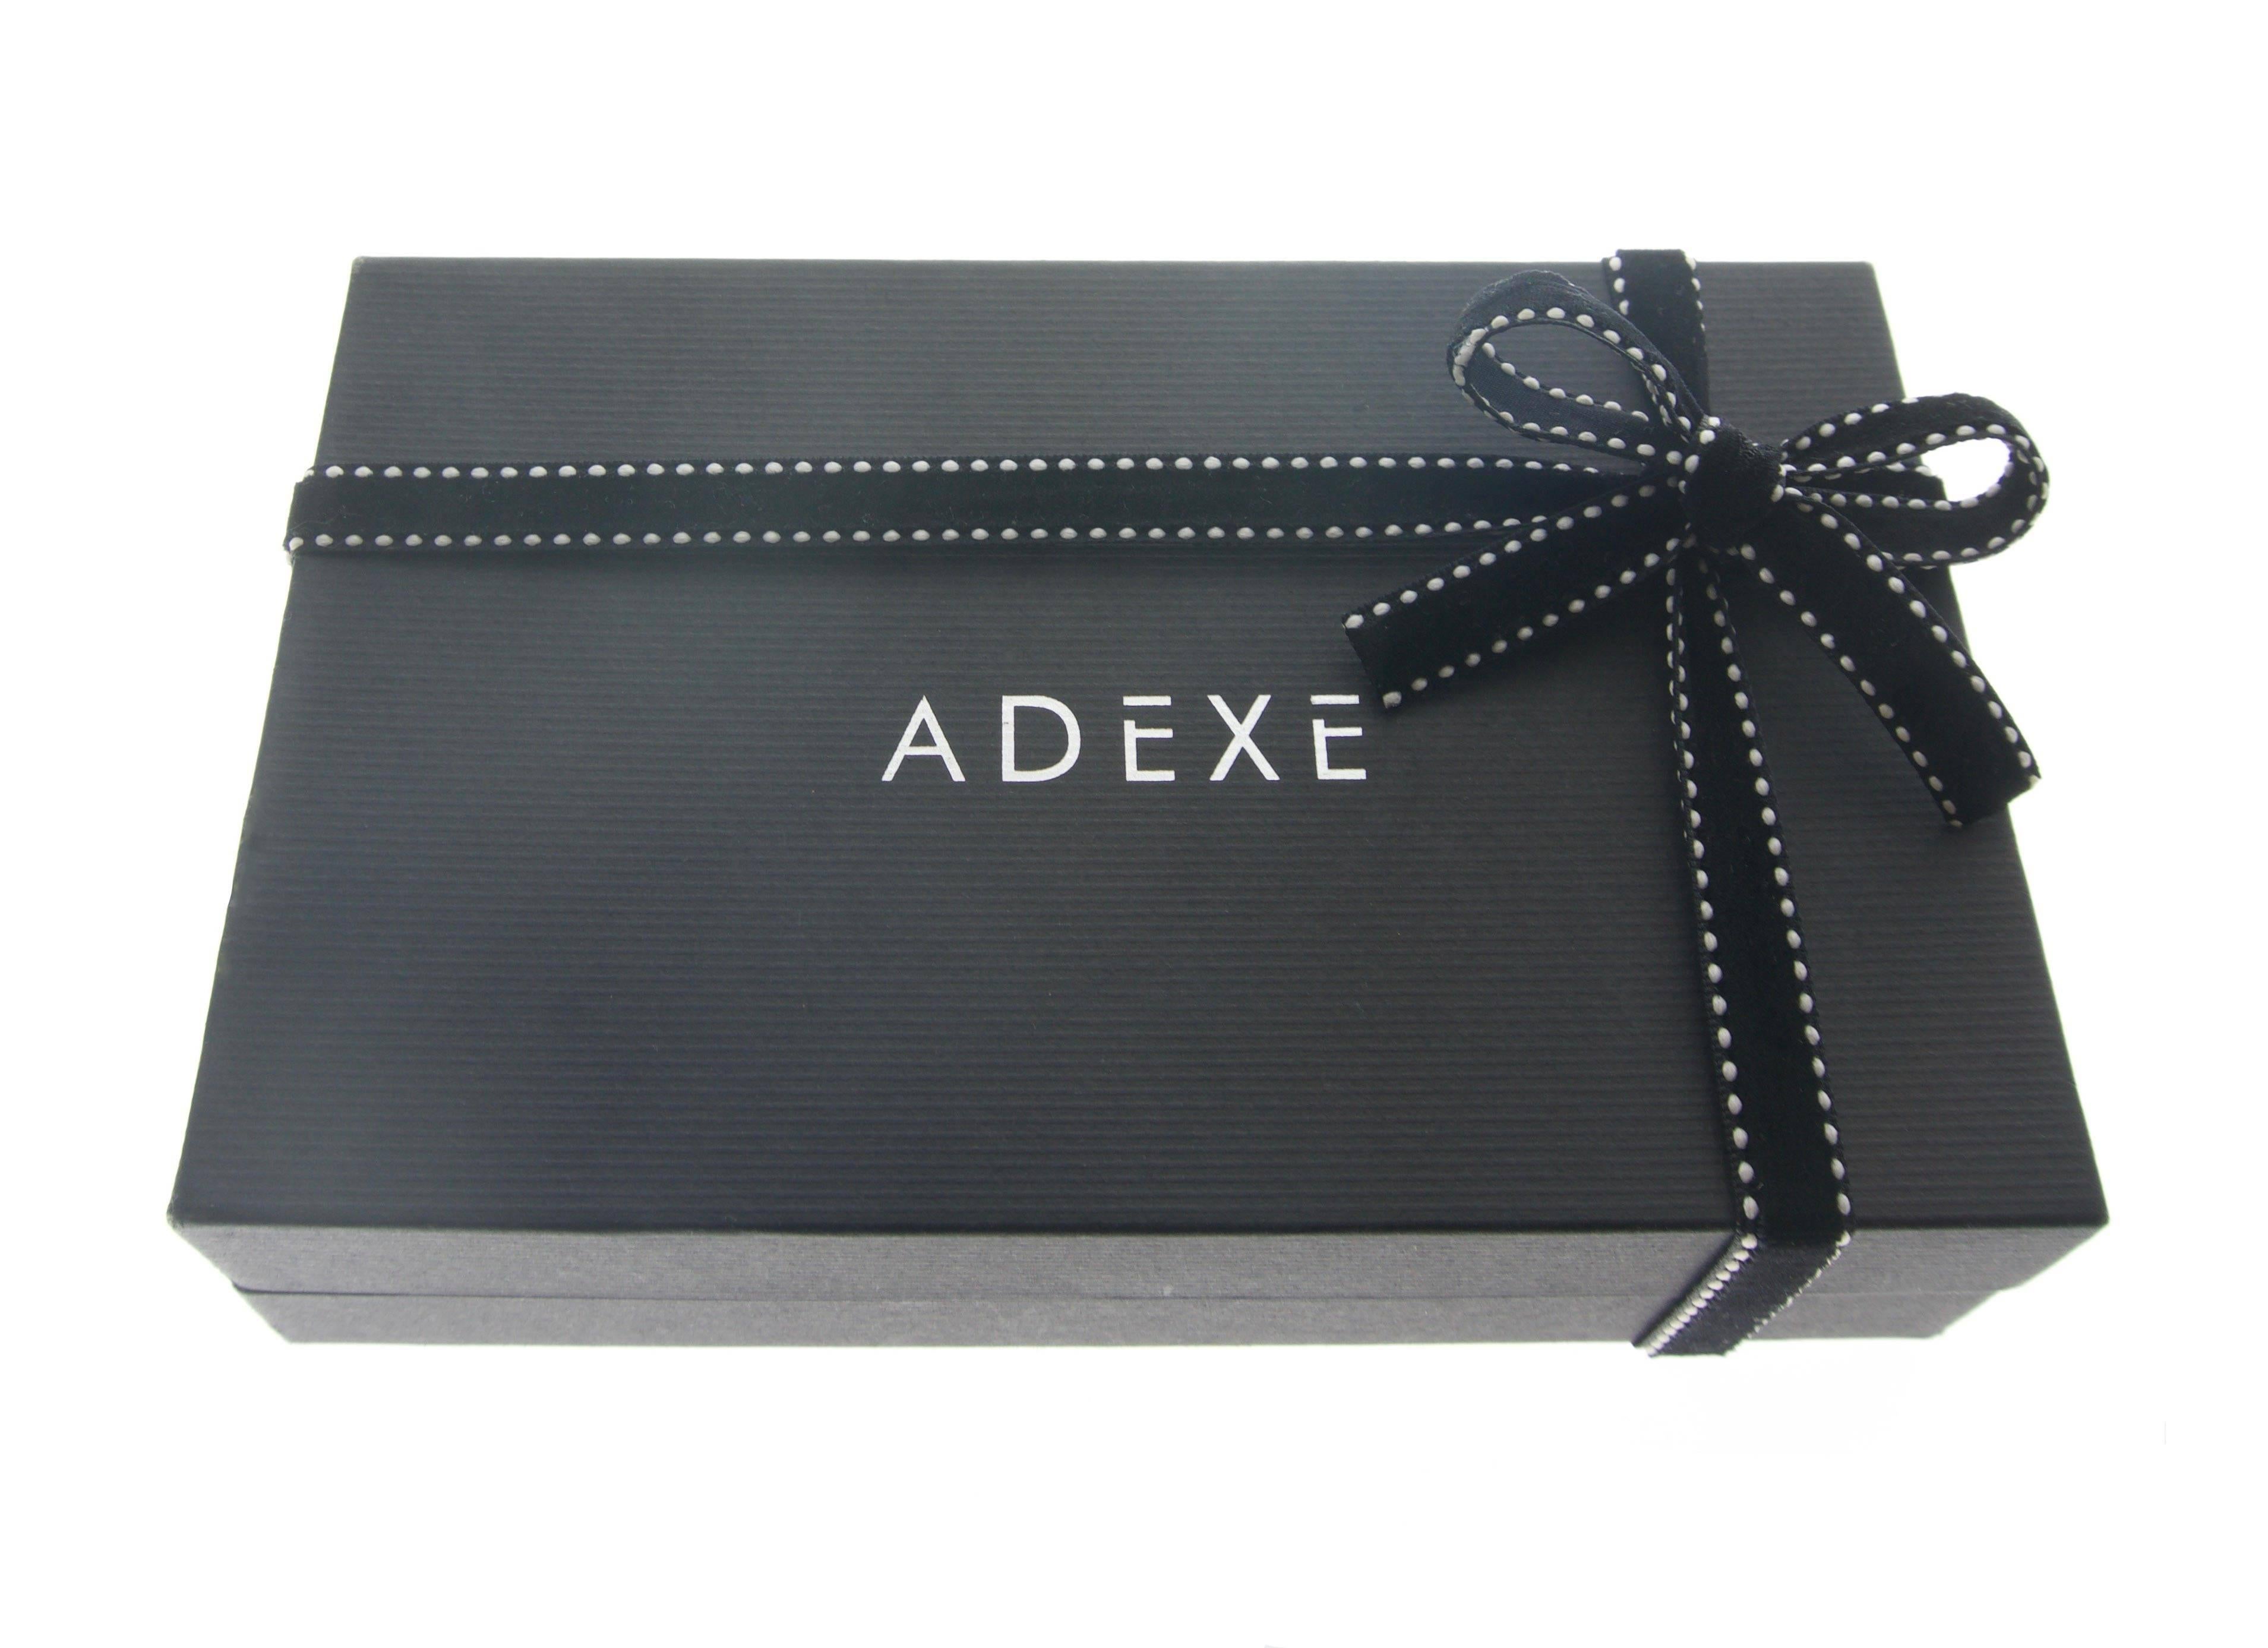 ADEXE Stainless Steel Sistine Black and White Convex Dial Quartz Wristwatch In New Condition For Sale In London, GB